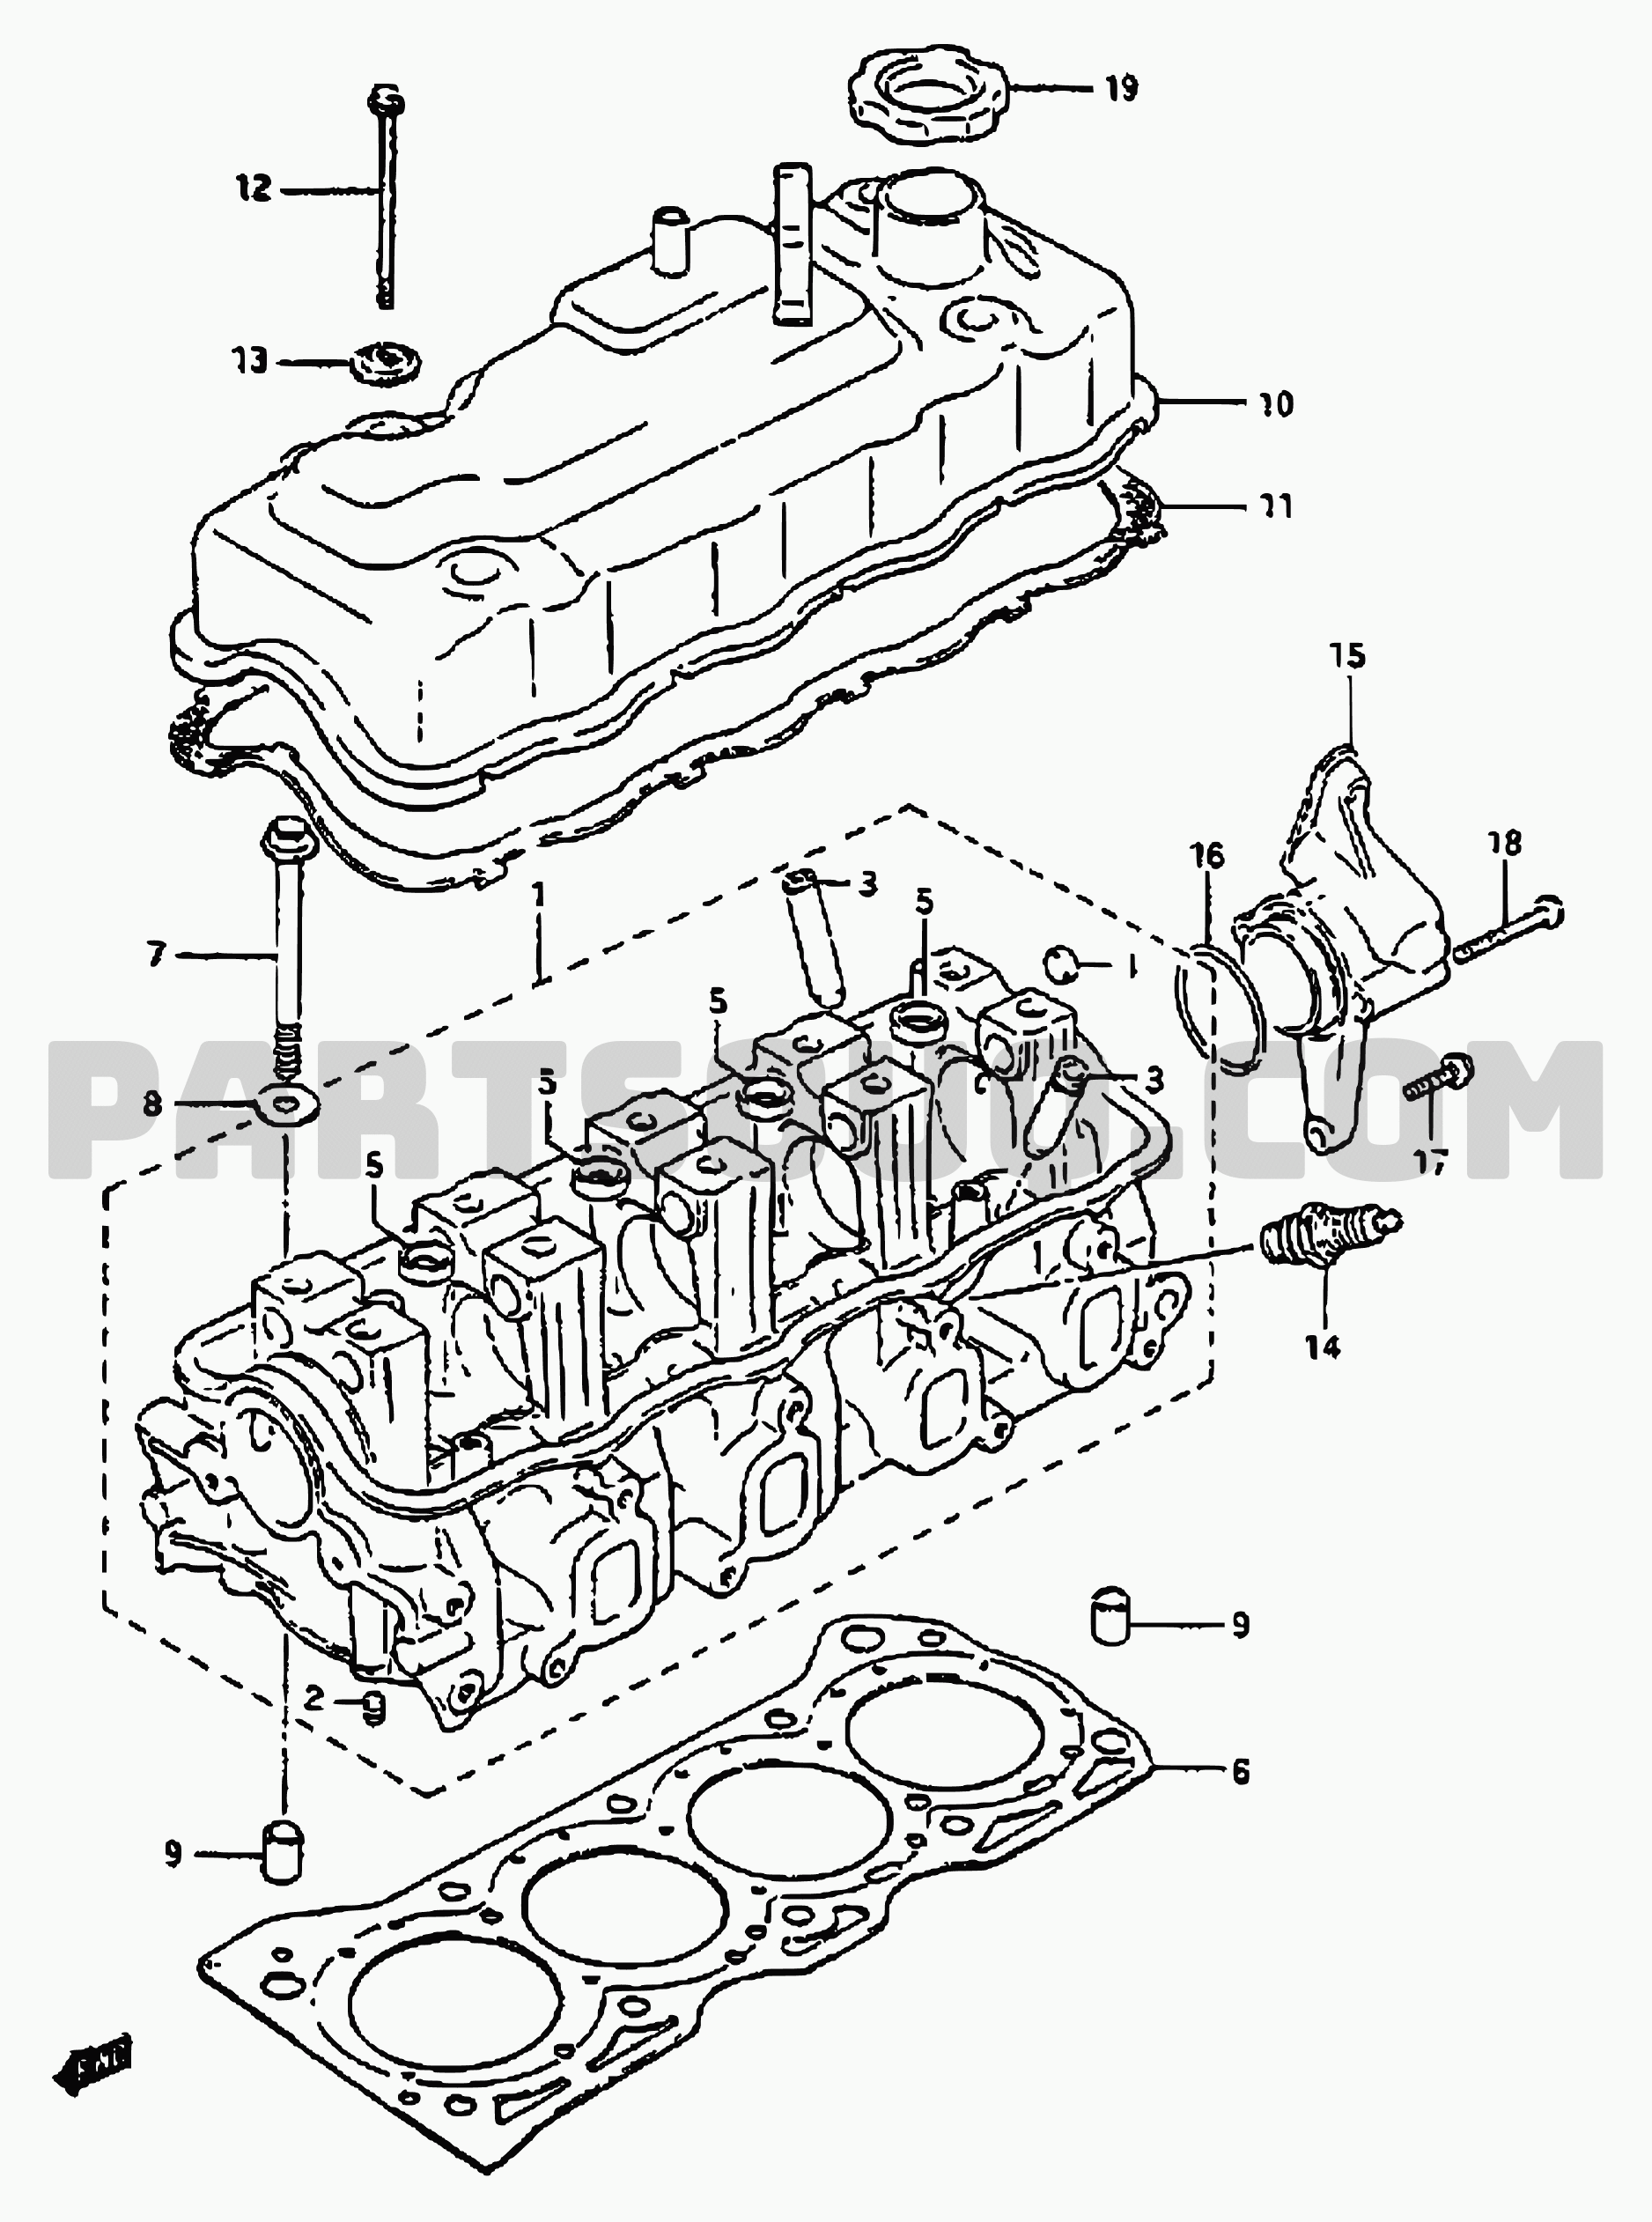 2 - CYLINDER HEAD AND COVER